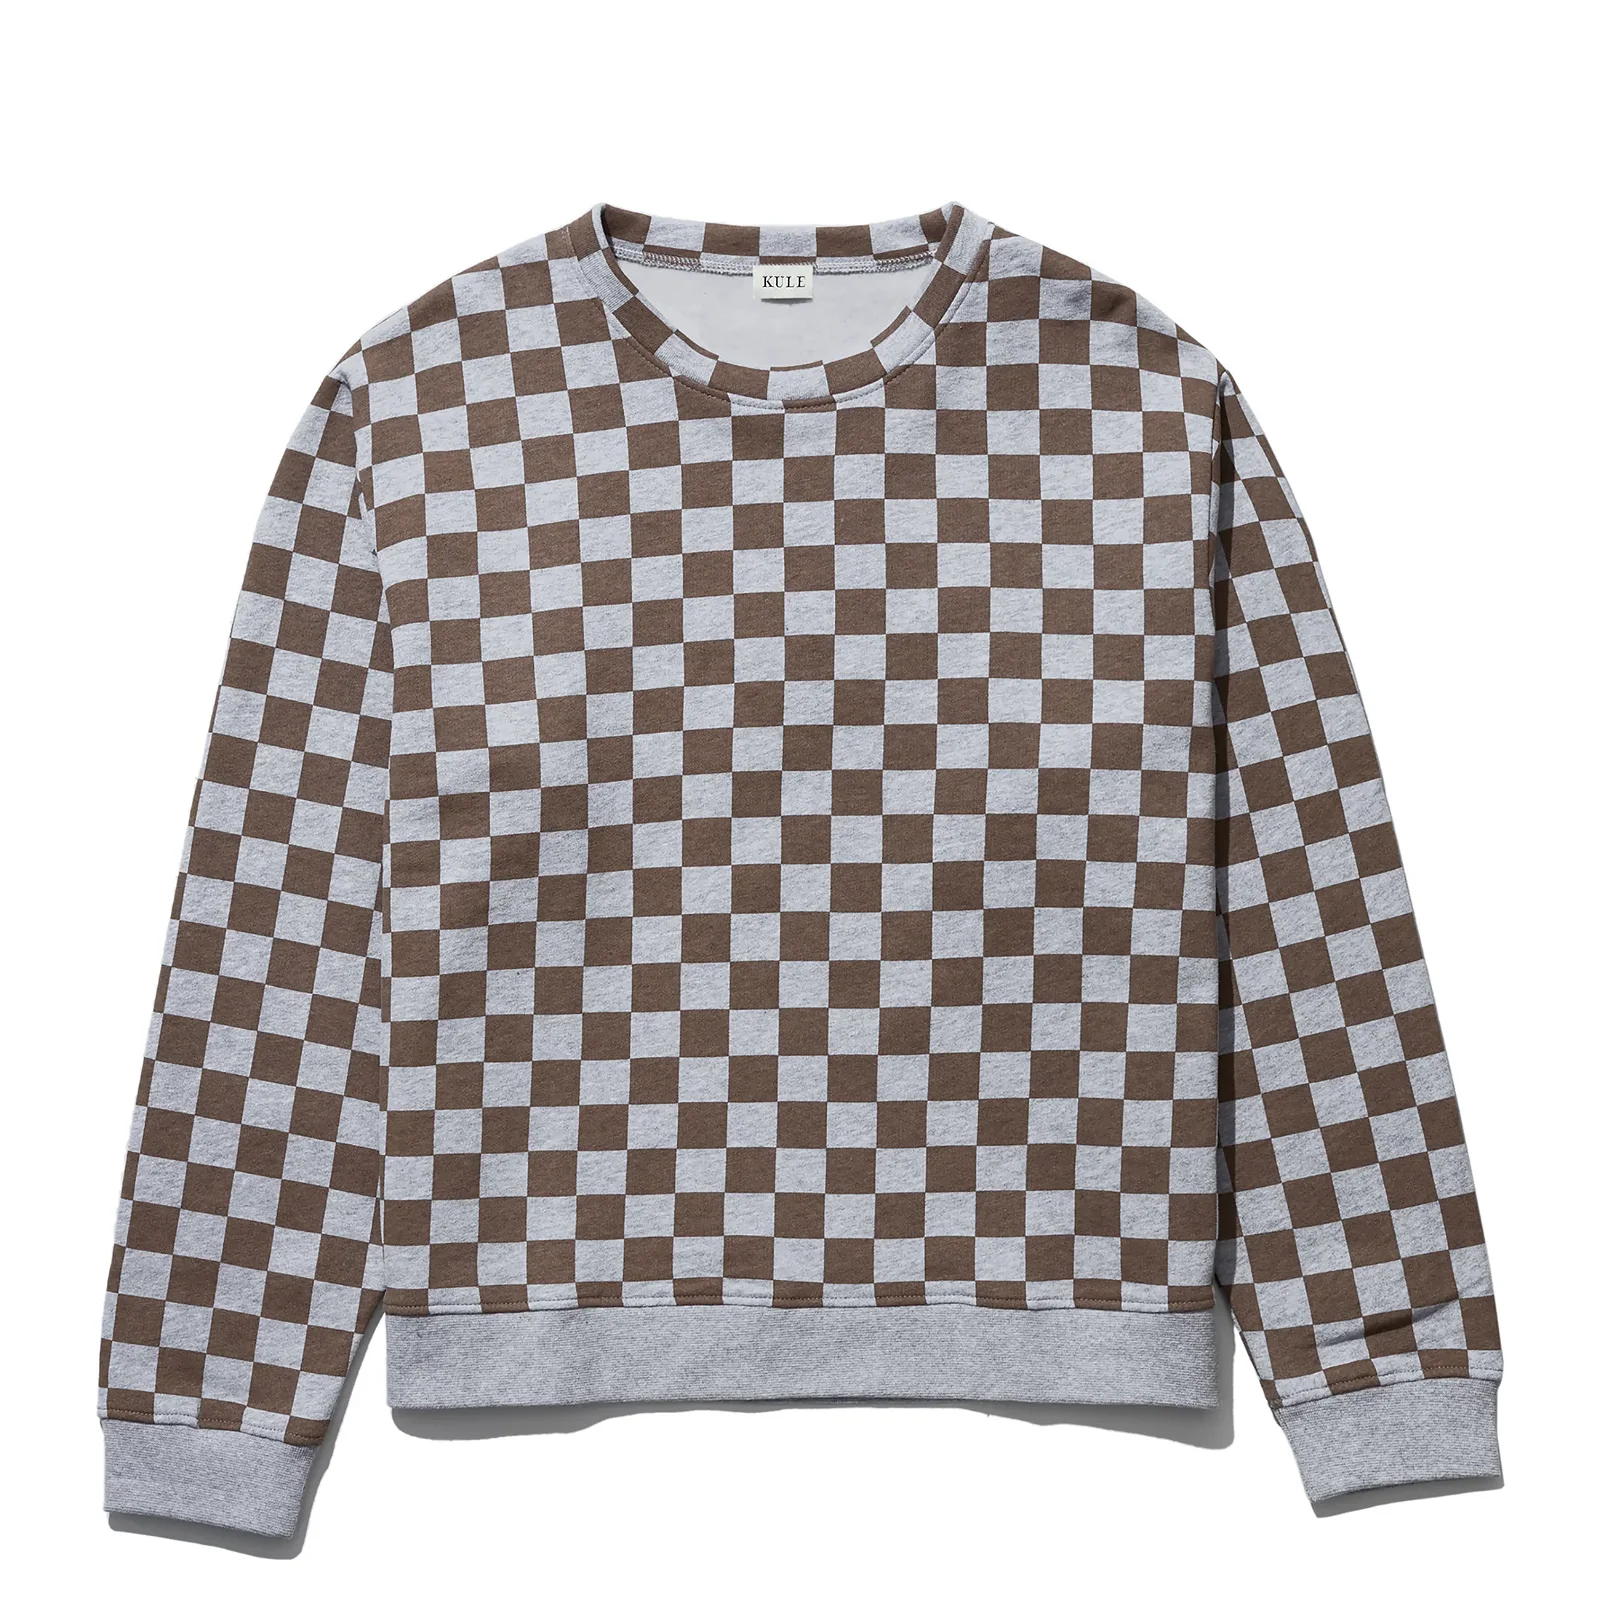 Image of The Check Raleigh - Heather Grey/Latte